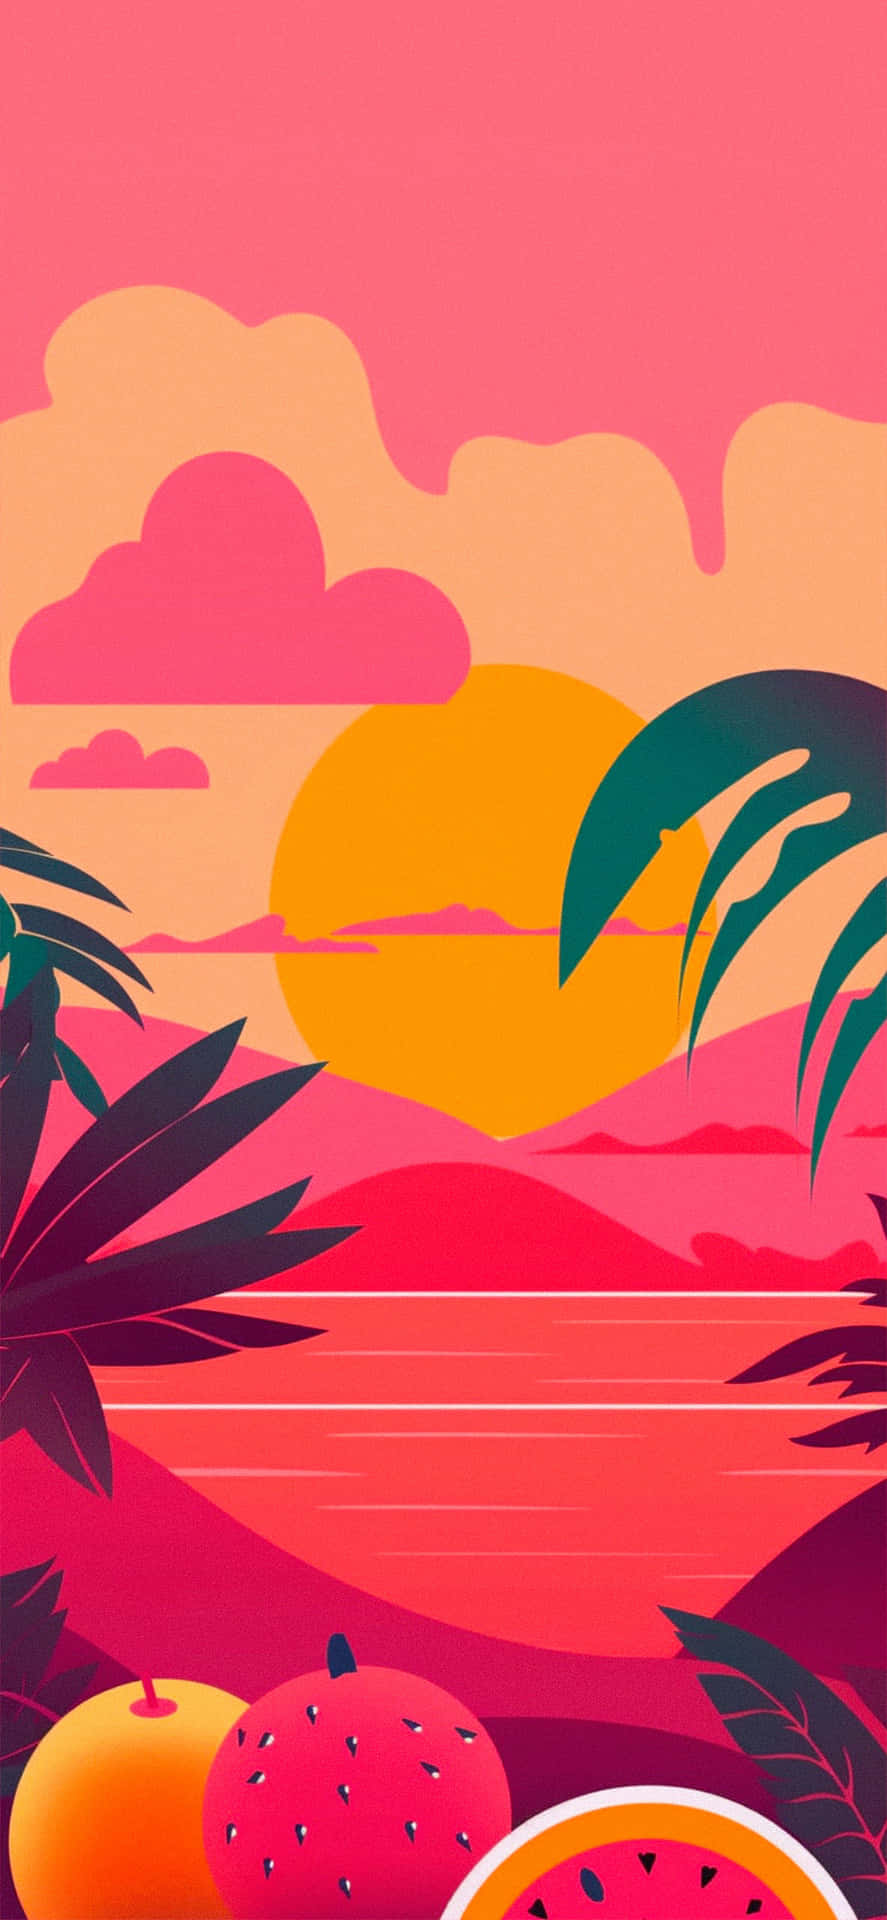 A Tropical Scene With Watermelon And Pineapples